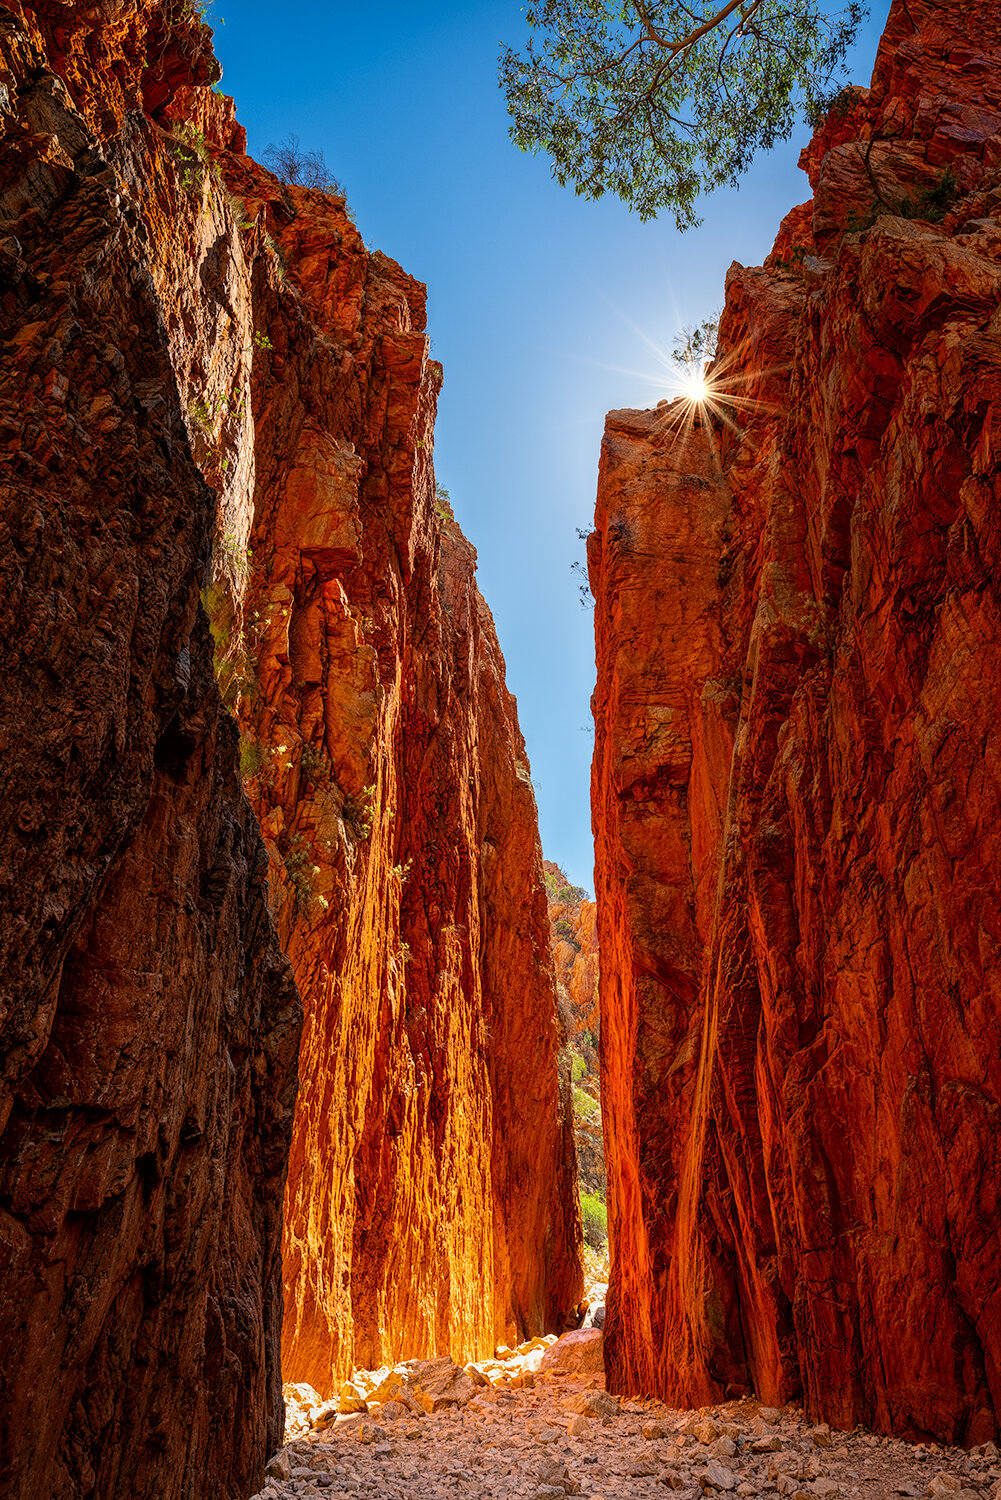 Standley Chasm: Category - Deserts